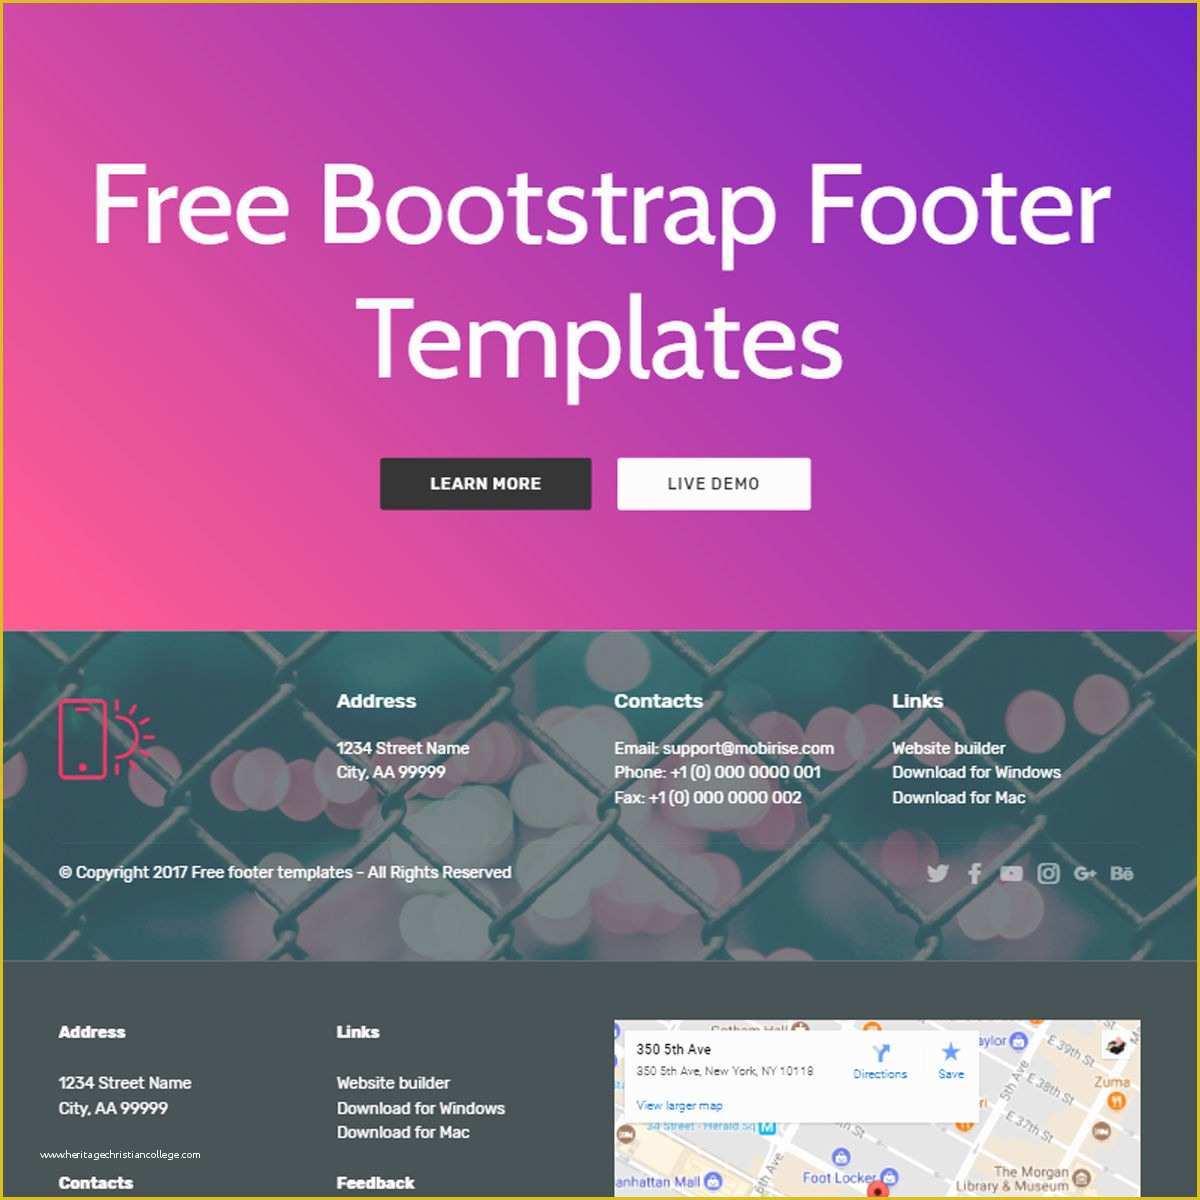 Free Bootstrap Templates 2017 Of 80 Free Bootstrap Templates You Can T Miss In 2019